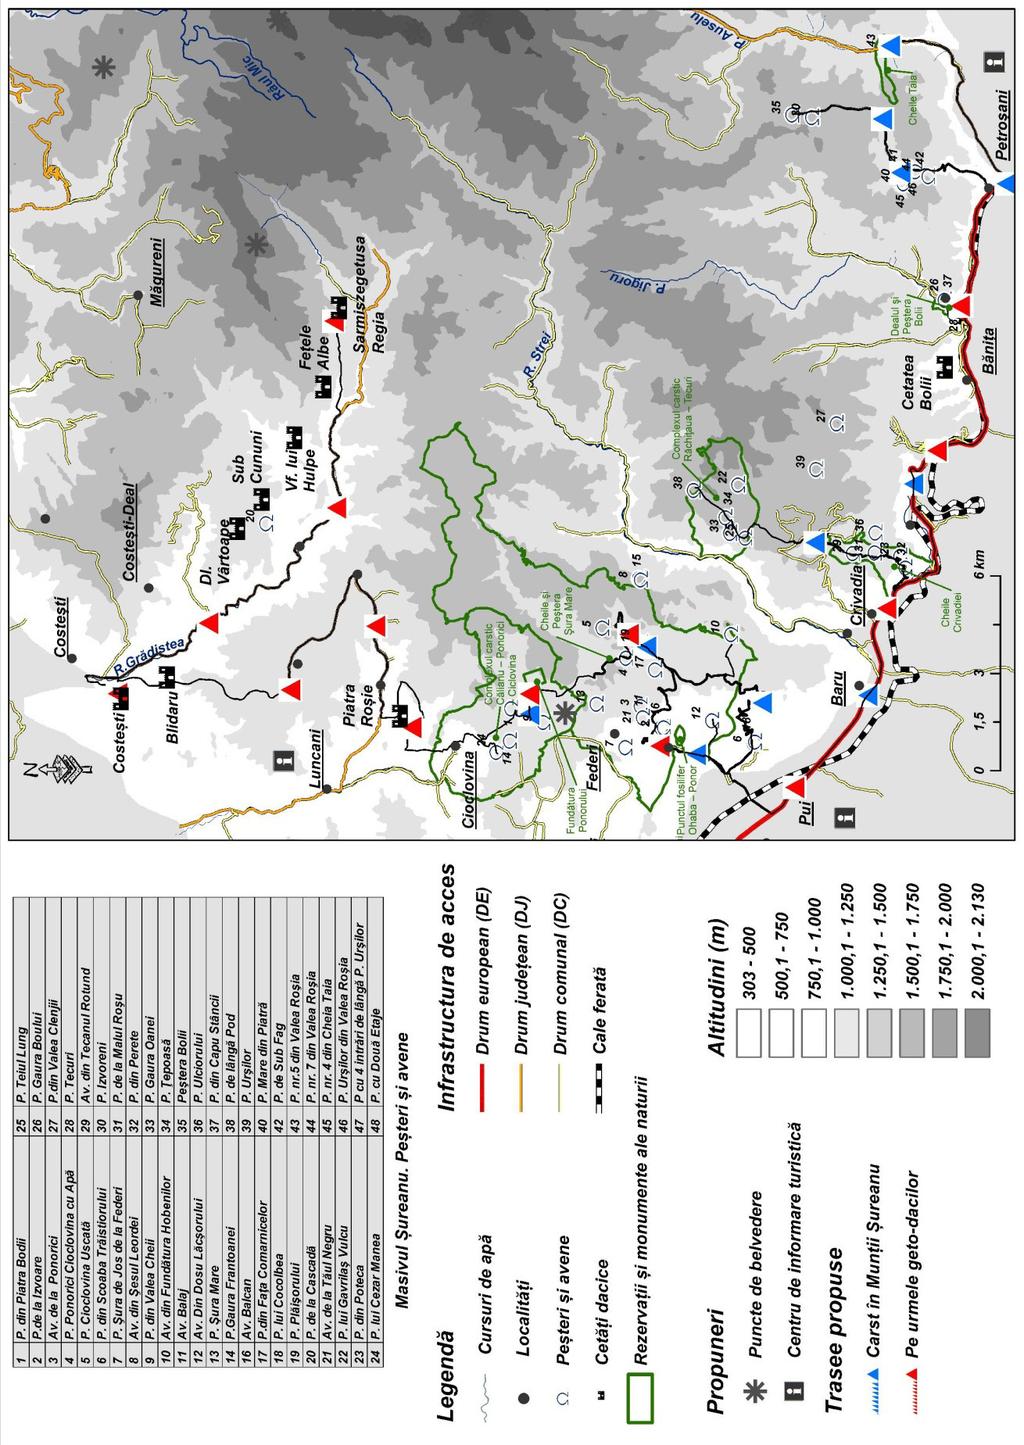 7.3 Tourism planning and development in the Șureanu Massif.